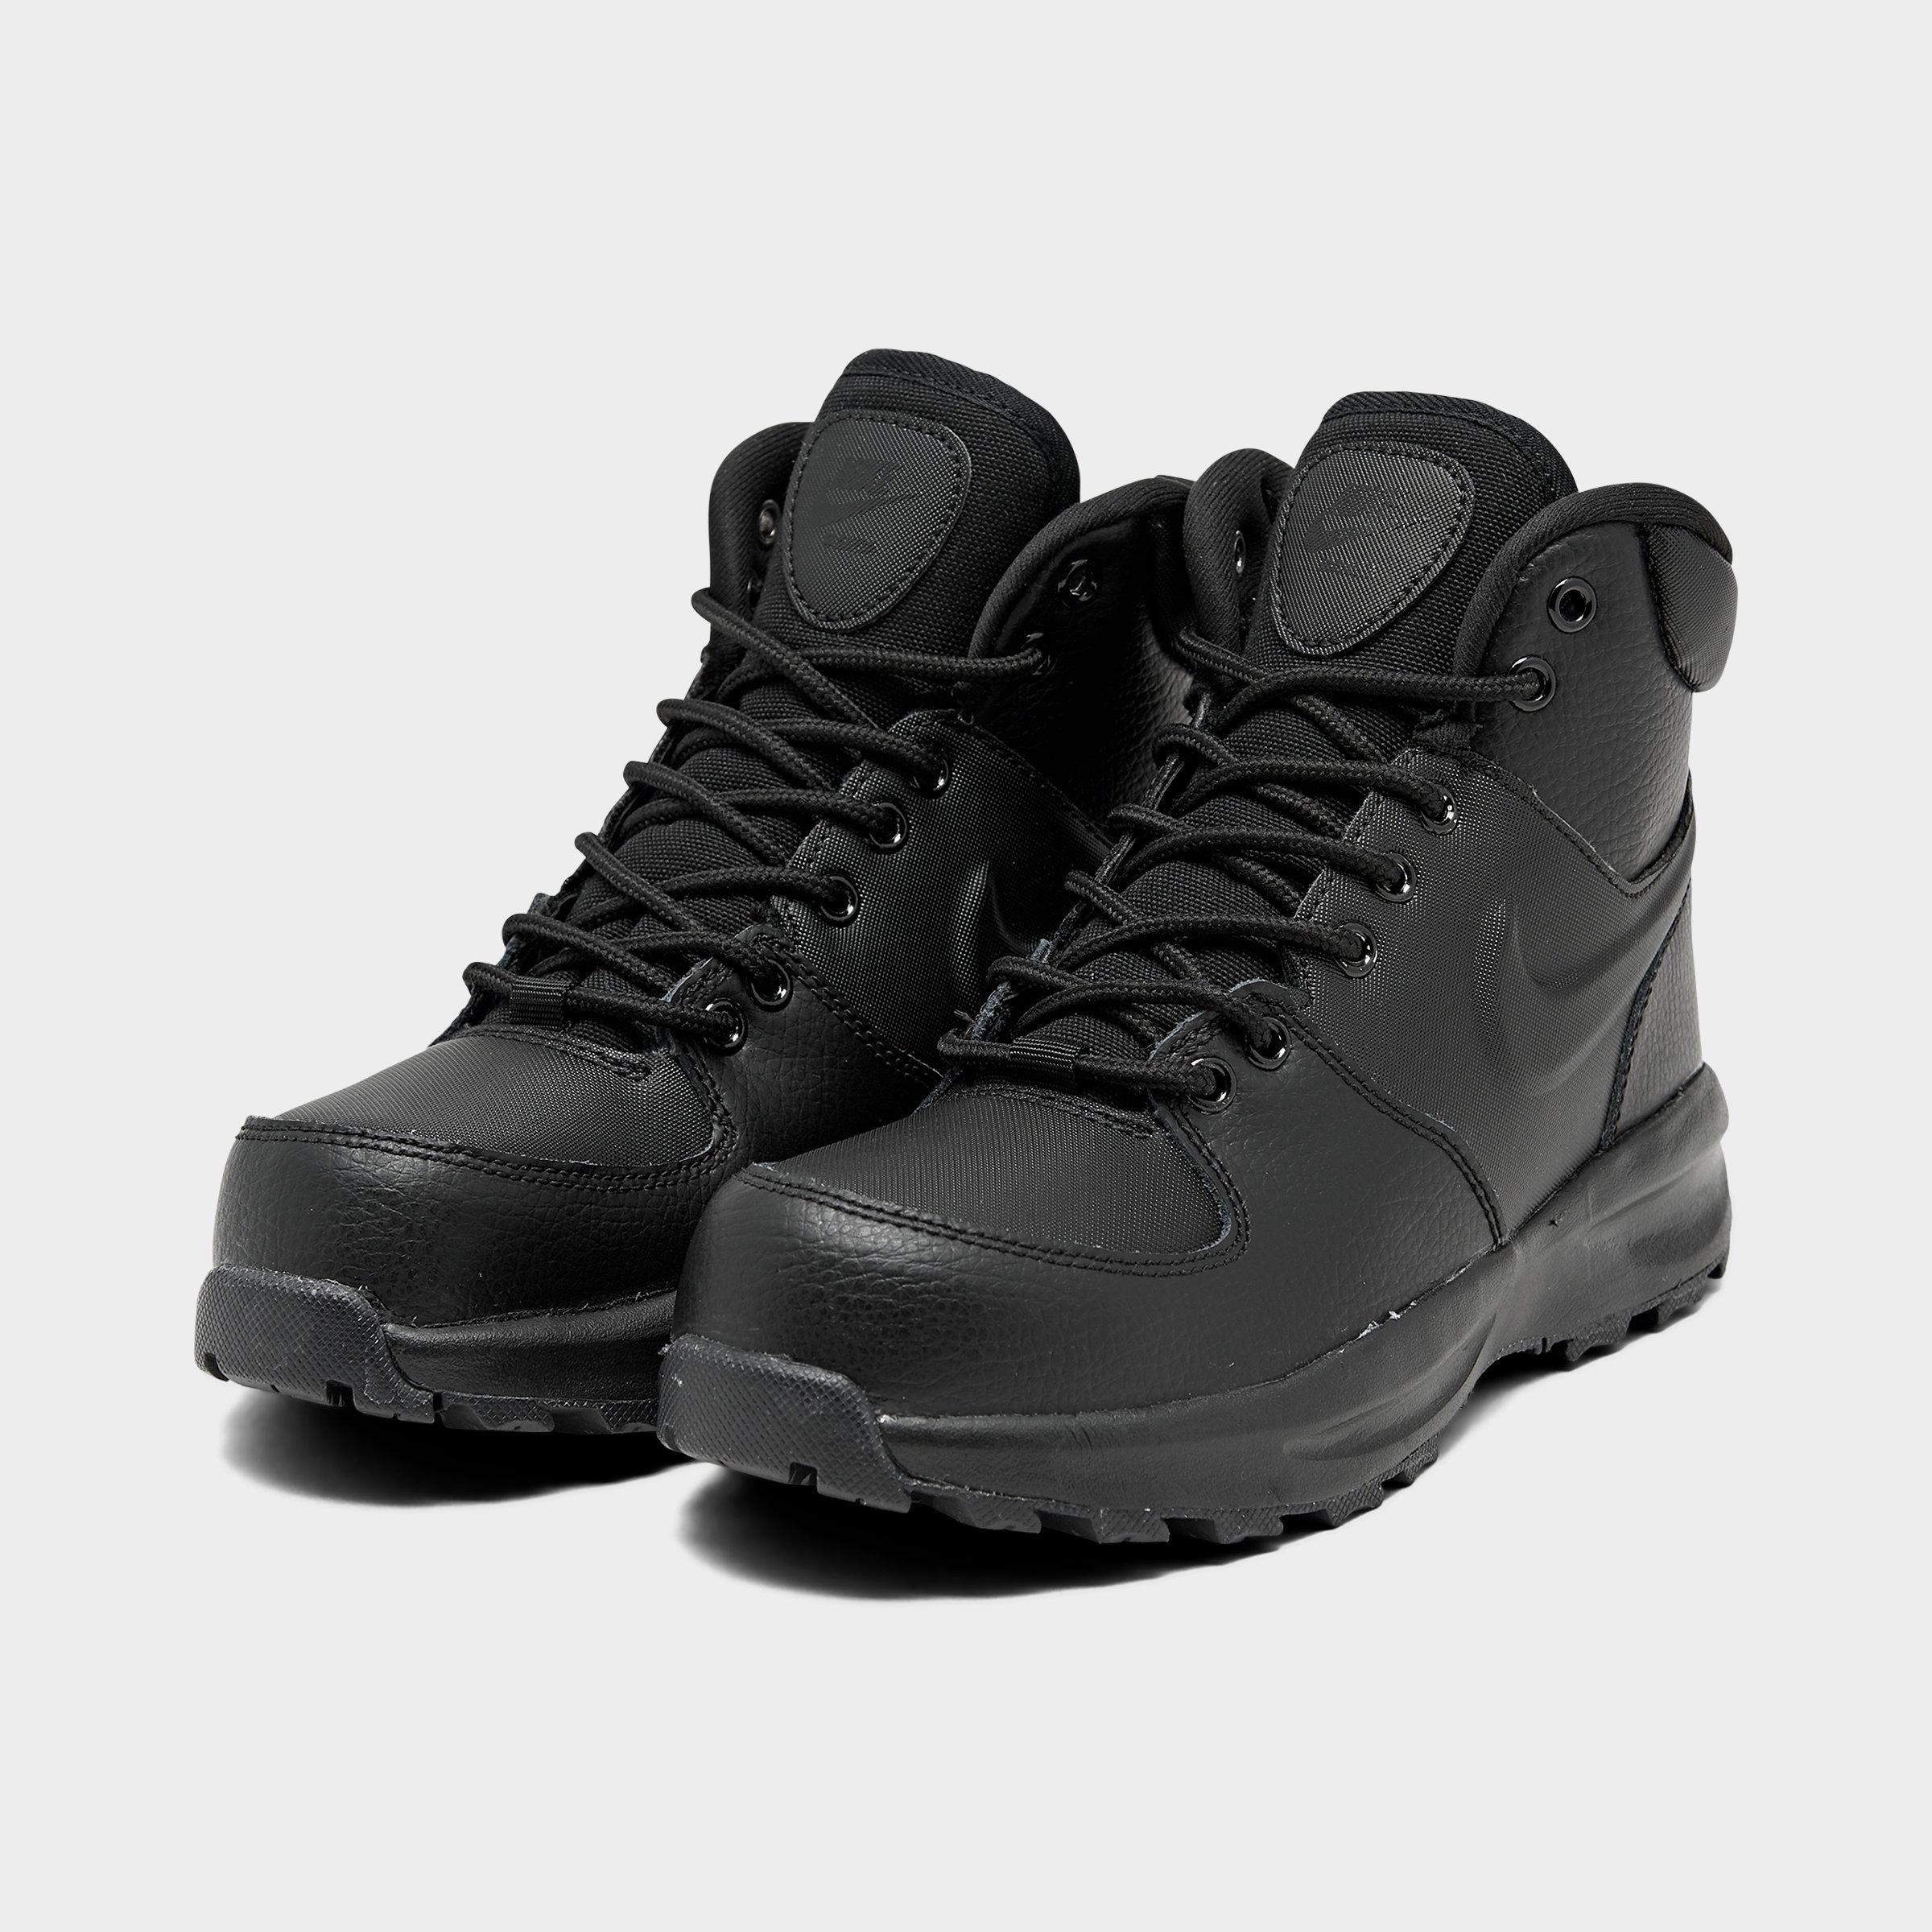 nike black boots shoes